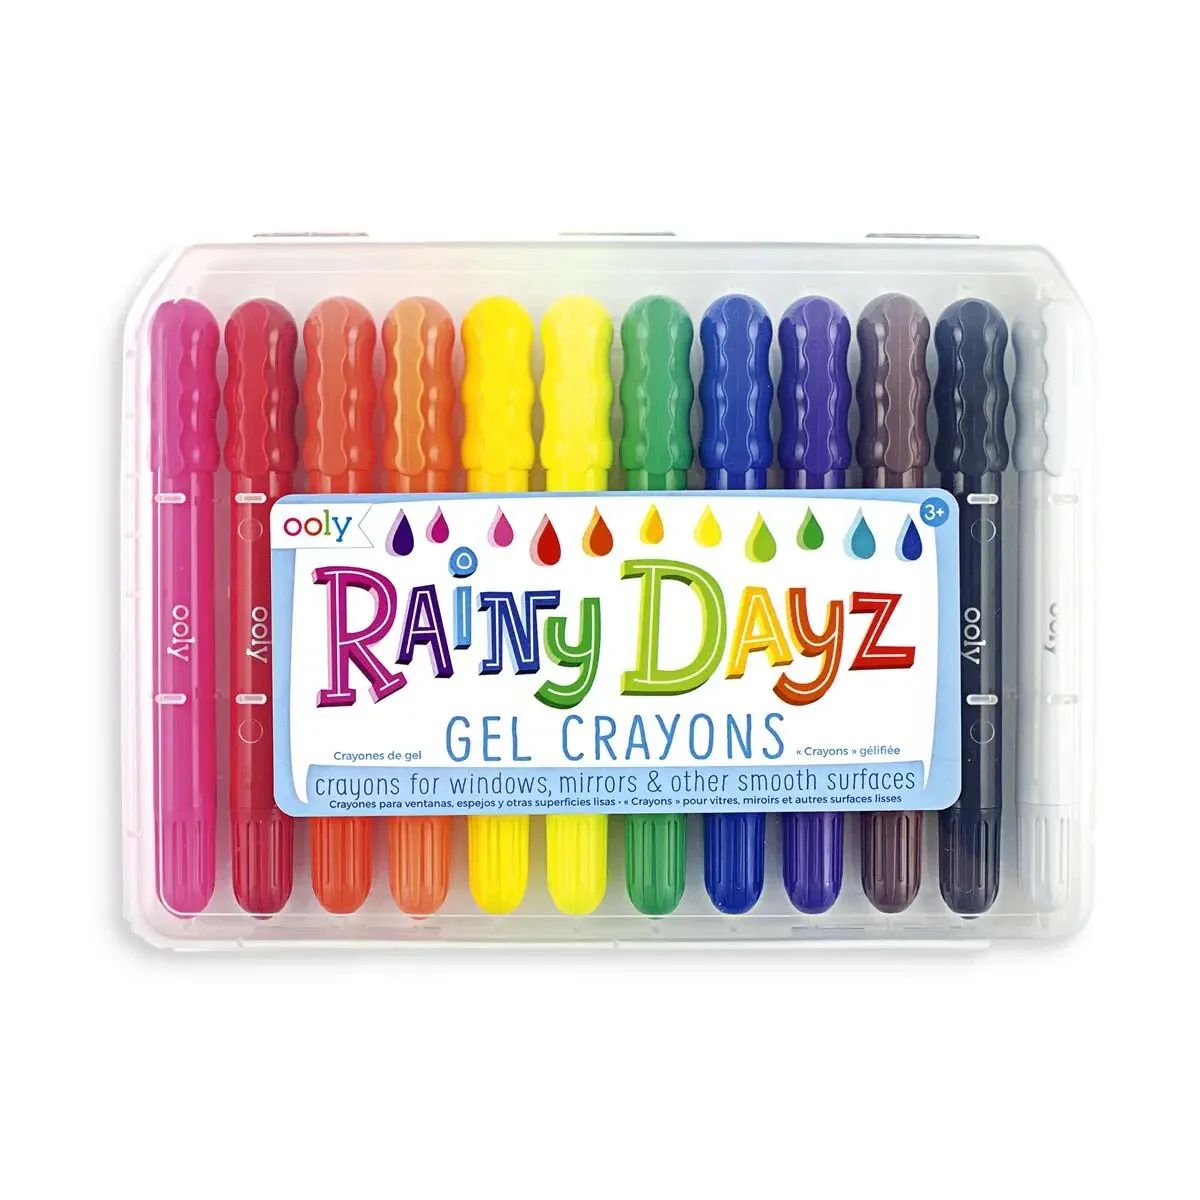 Rainy Day Gel Crayons | Lovely Little Things Boutique